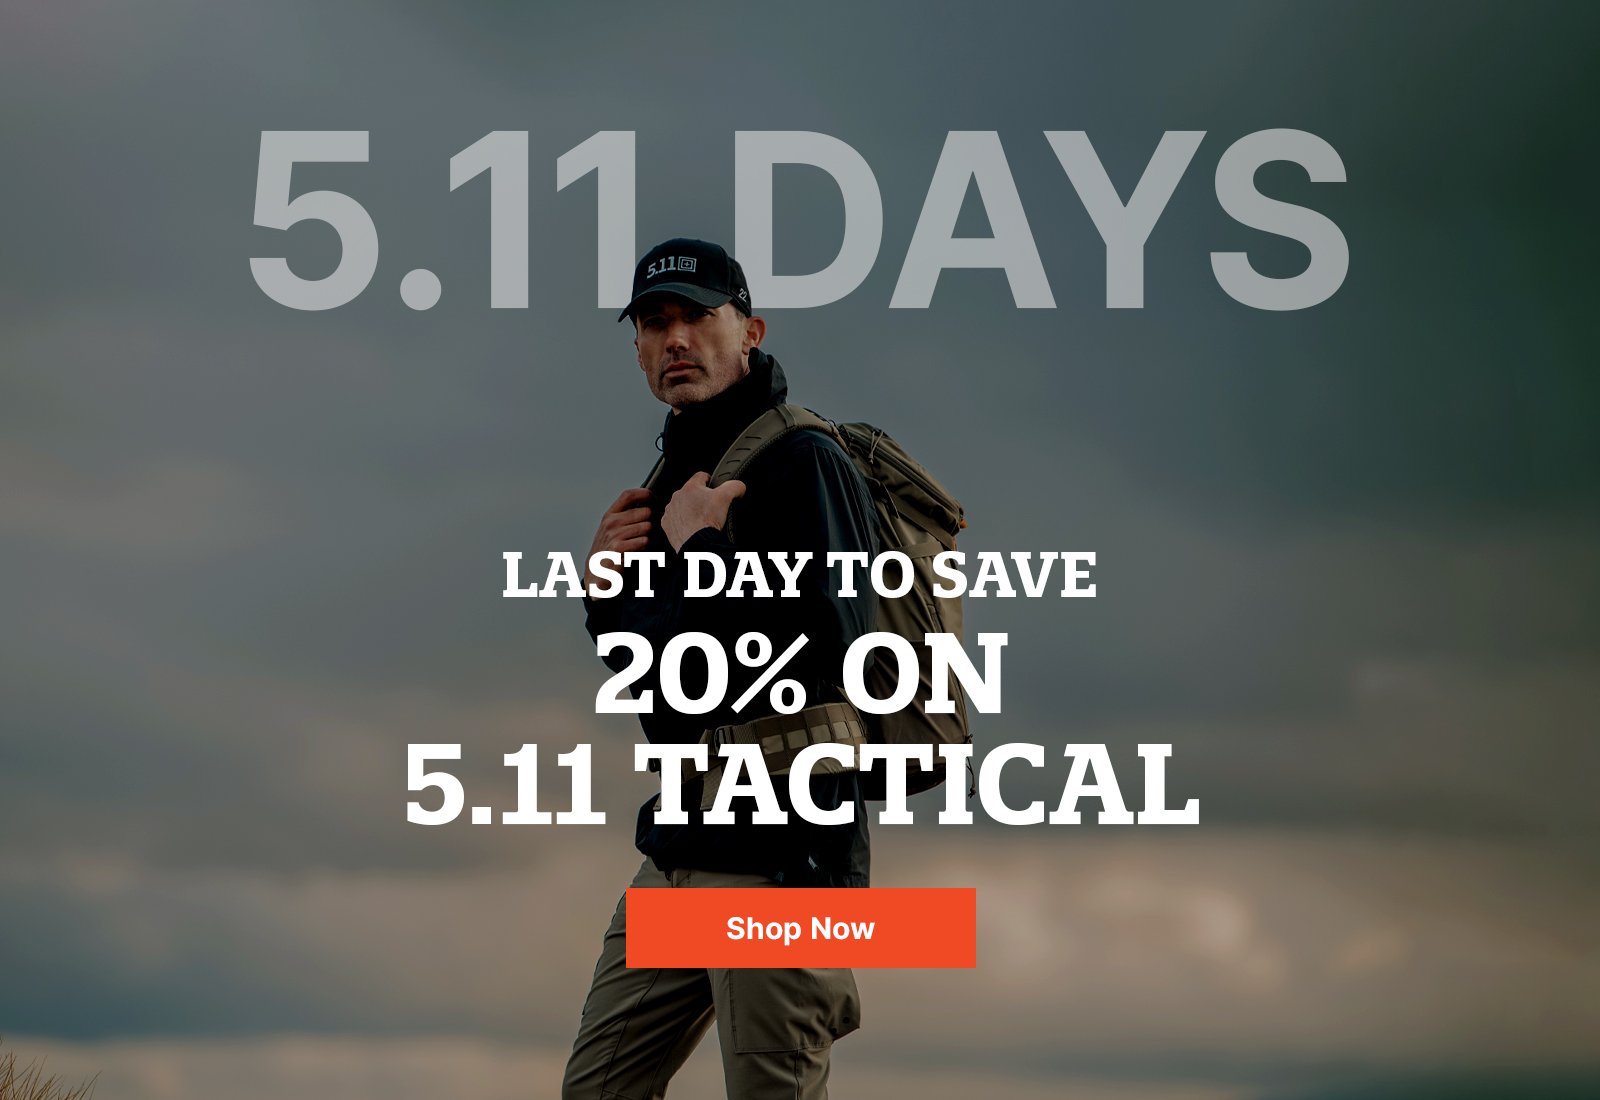 Last day to save!